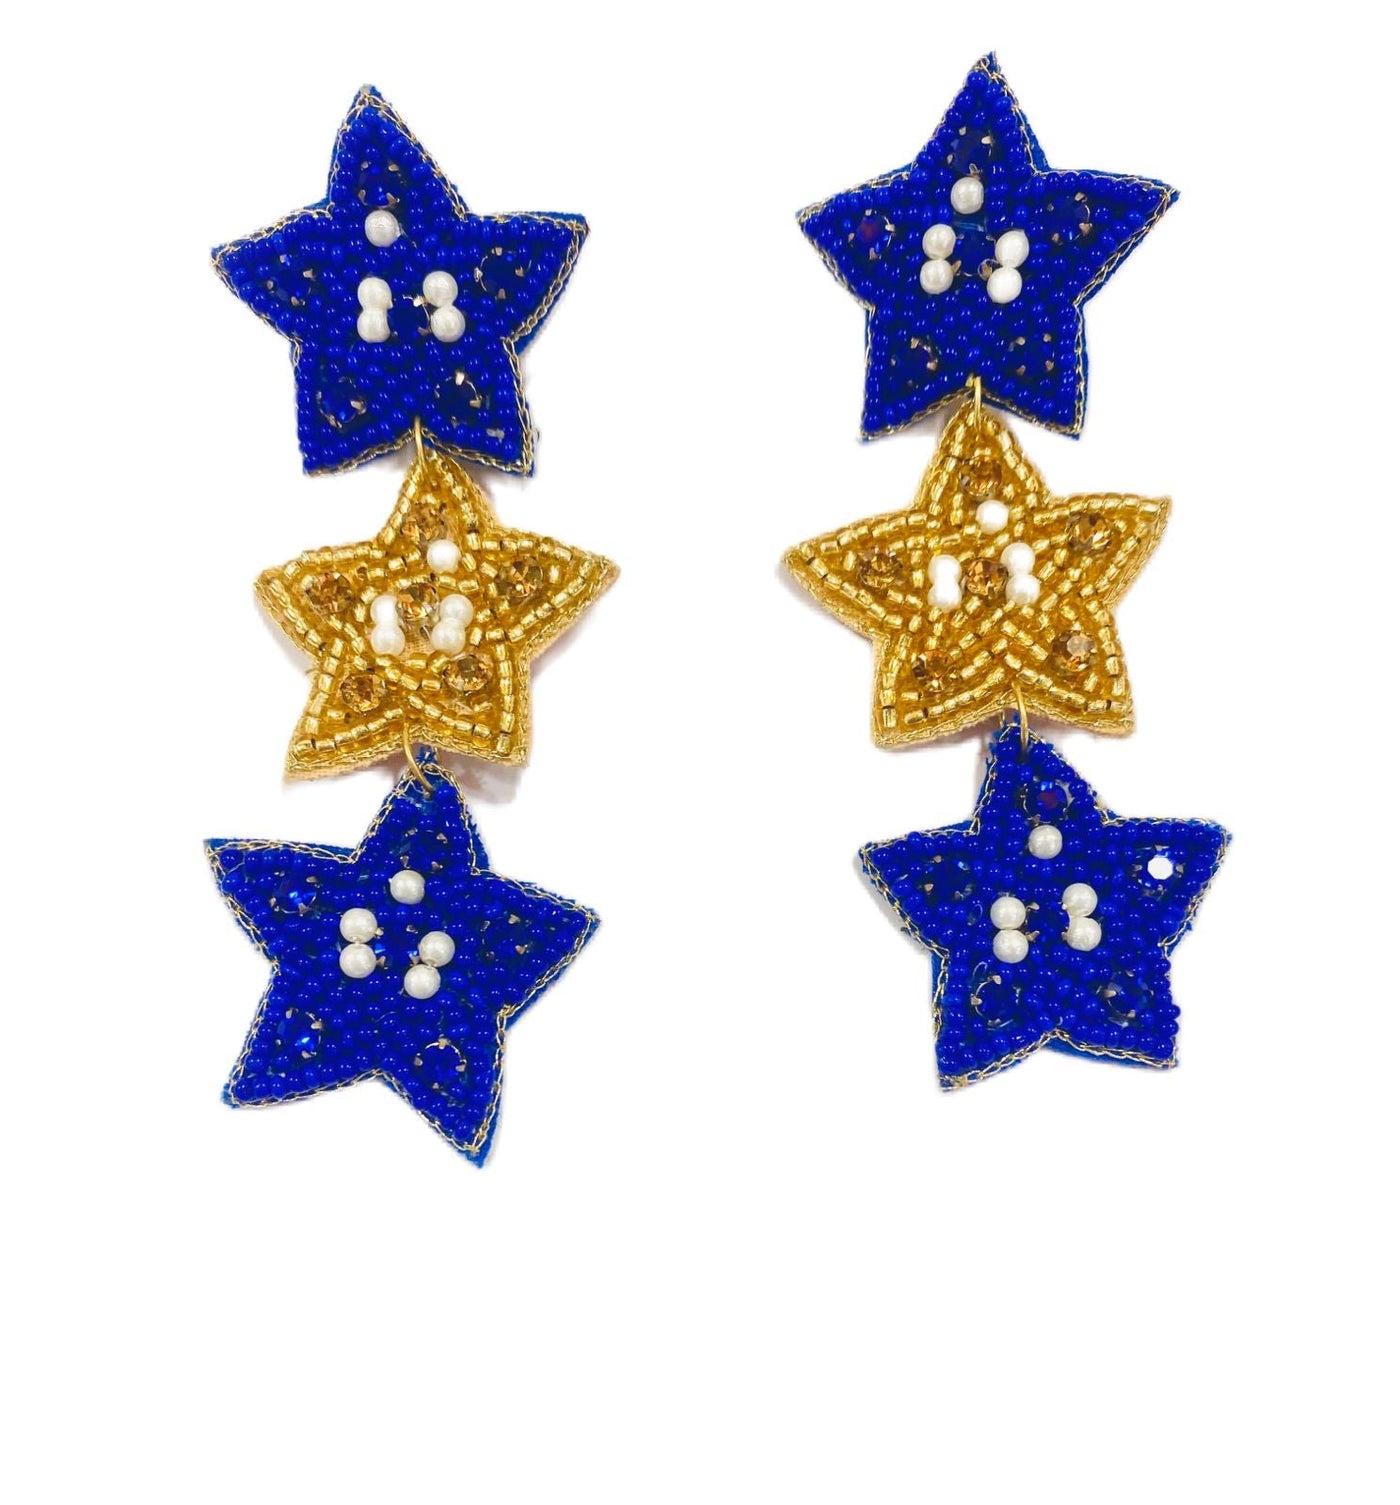 Triple Star Earrings - Blue and Gold